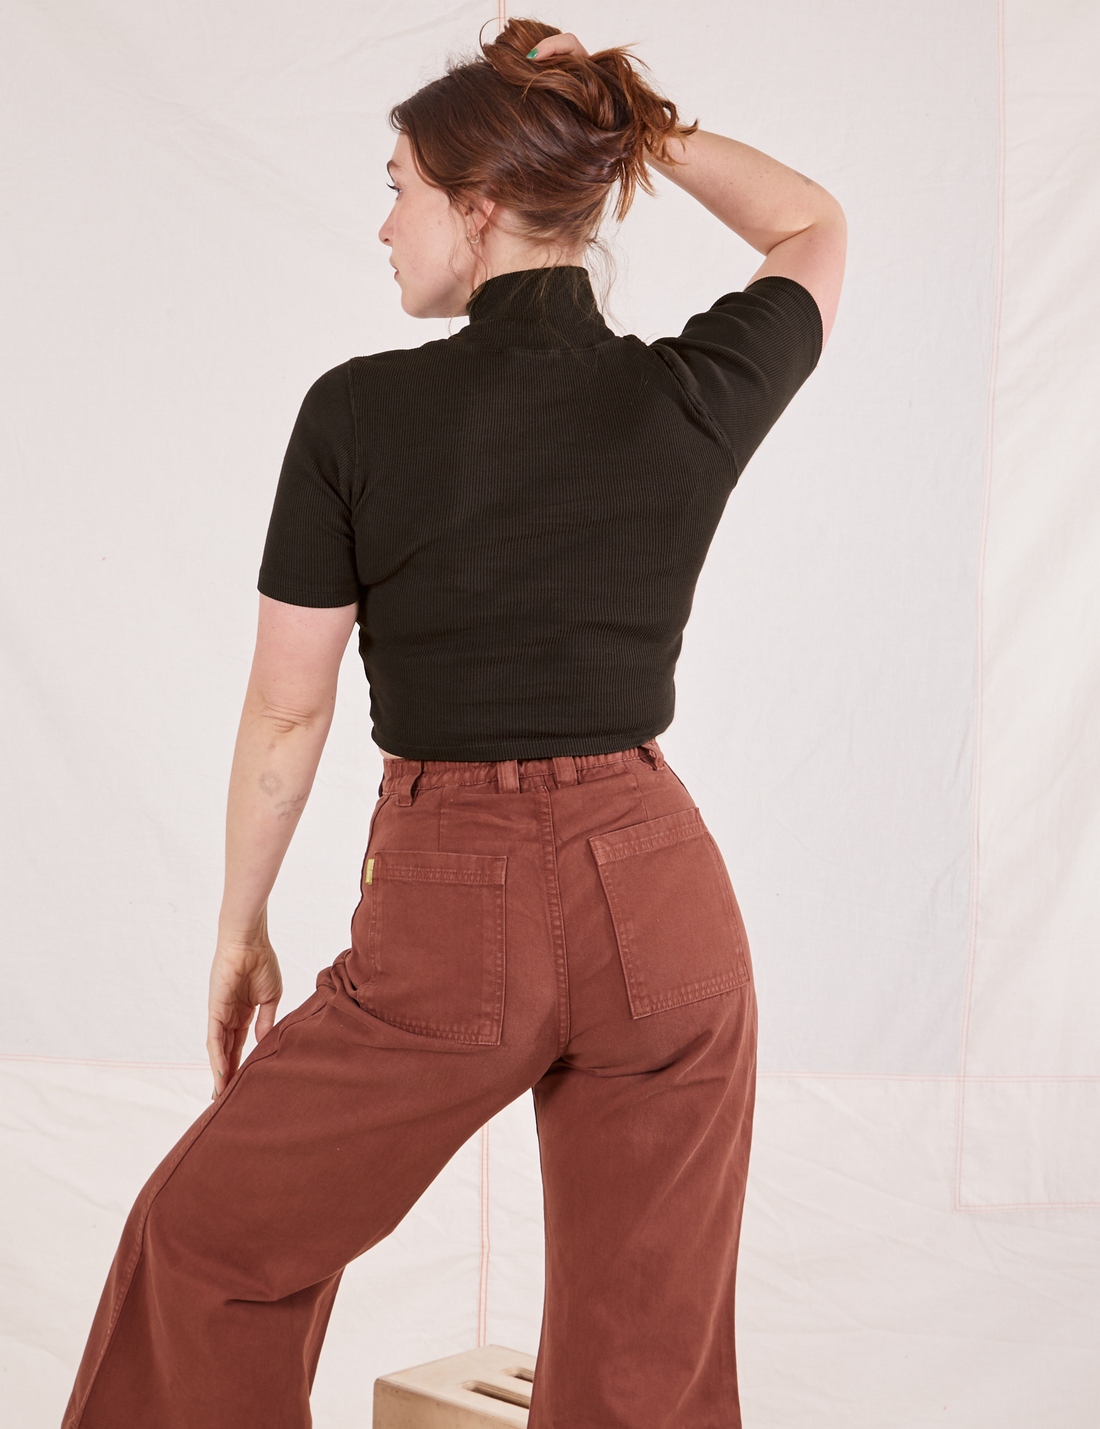 Back view on Allison wearing 1/2 Sleeve Essential Turtleneck in Espresso Brown and fudgesicle brown Bell Bottoms